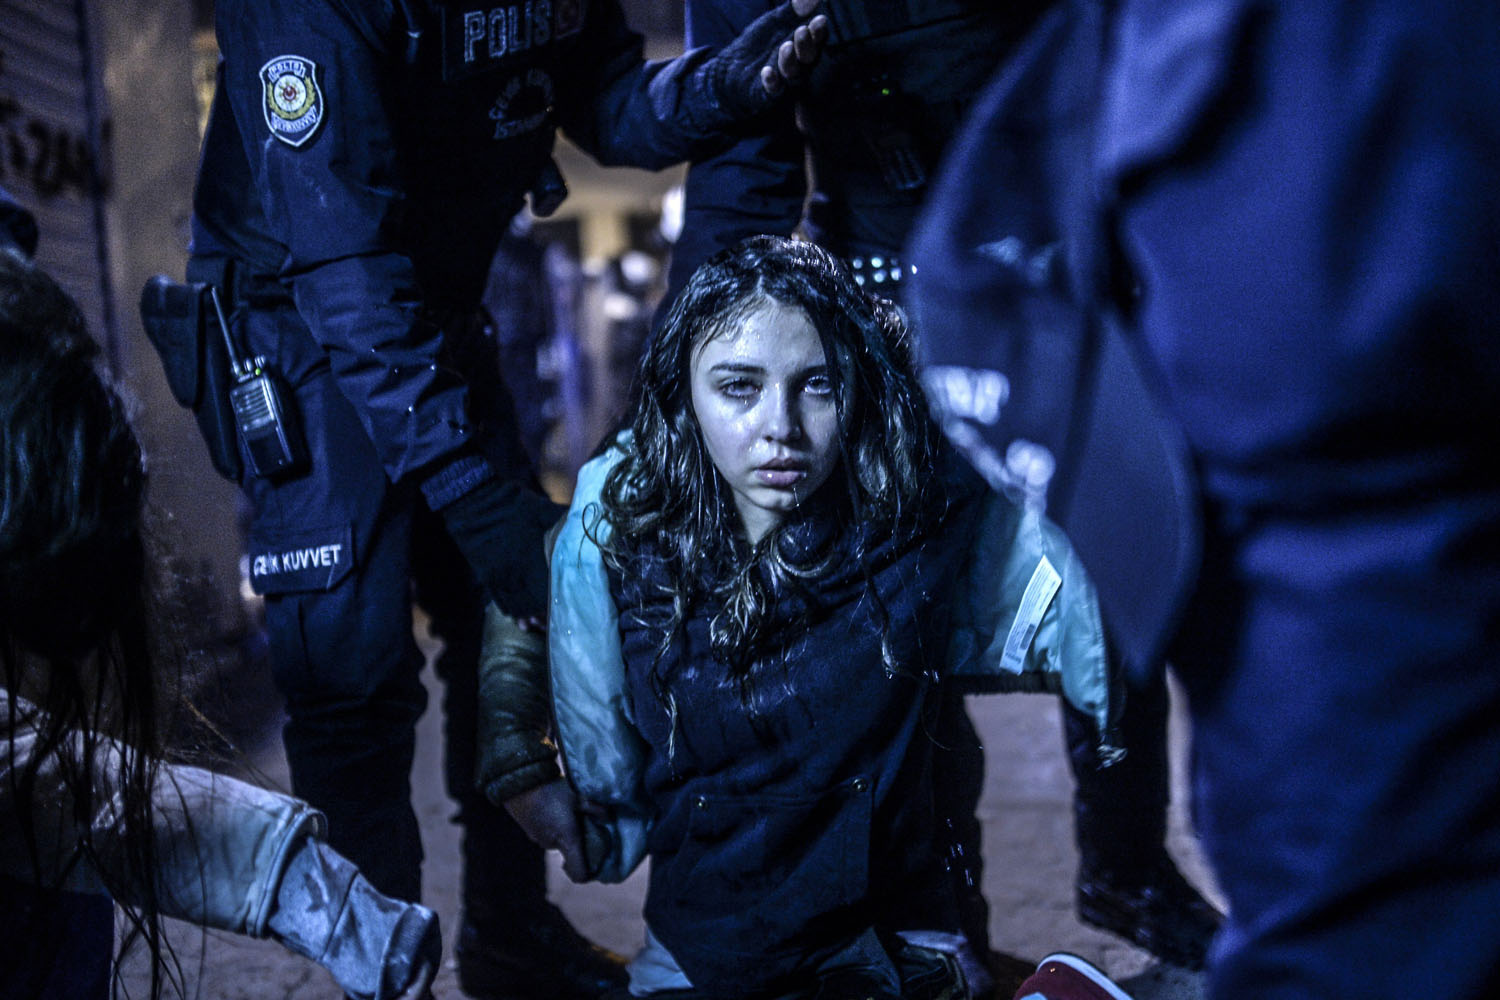 A young girl is pictured after she was wounded during clashes between riot-police and prostestors after the funeral of Berkin Elvan, the 15-year-old boy who died from injuries suffered during last year's anti-government protests, in Istanbul on March 12, 2014.